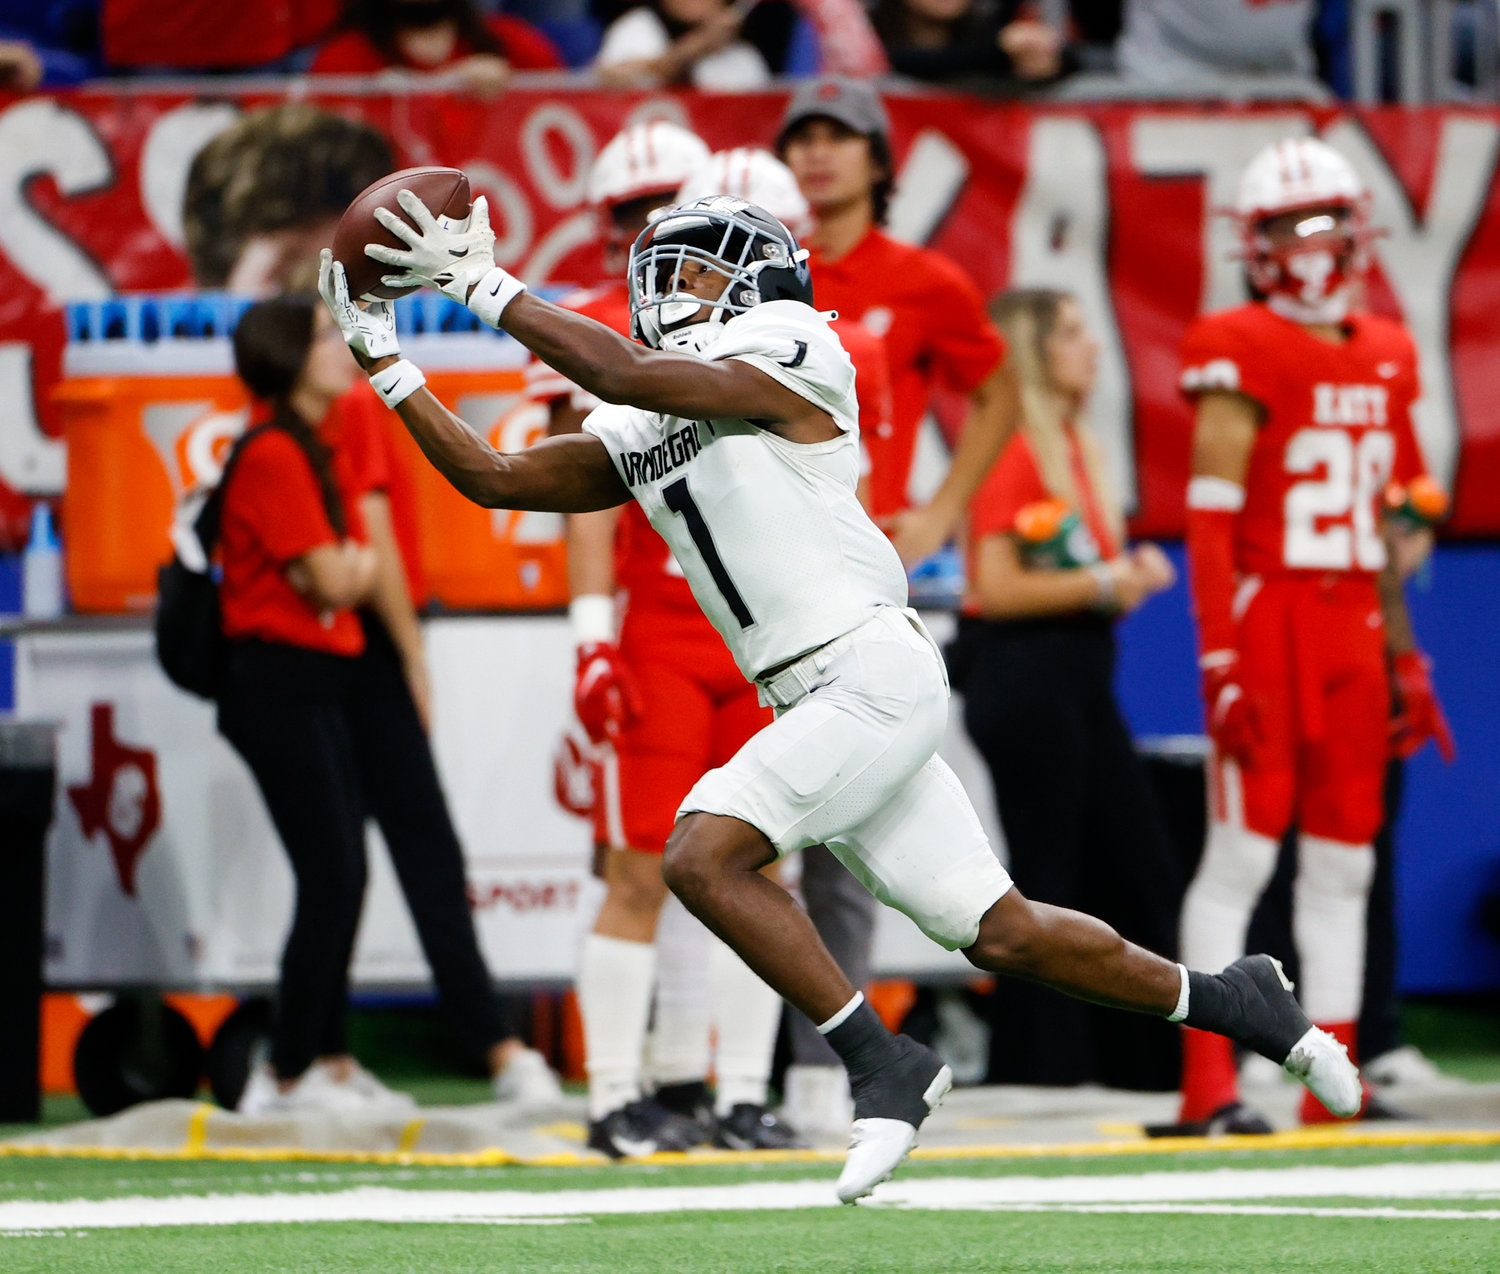 Vandegrift Vipers junior wide receiver Miles Coleman (1) scores on a 75-yard touchdown catch during the Class 6A-DII state semifinal football game between Katy and Vandegrift on Dec. 10, 2022 in San Antonio.